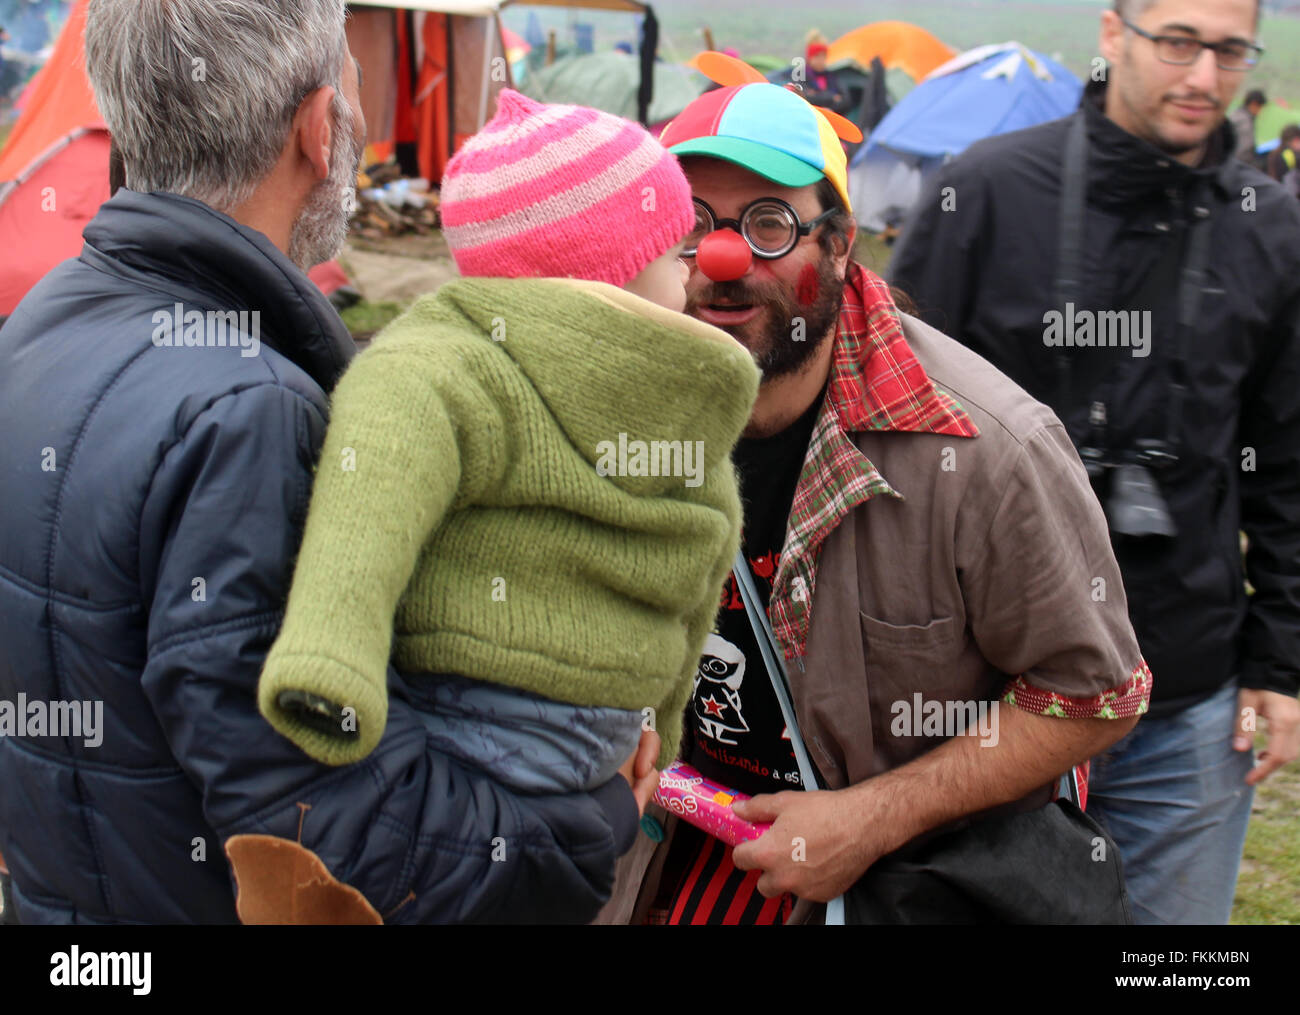 Idomeni, Greece. 9th Mar, 2016. A member of the group 'Rebel Clowns' speaking with children in the refugee camp at the Greek-Macedonian border in Idomeni, Greece, 9 March 2016. Photo: Gregor Mayer/dpa/Alamy Live News Stock Photo